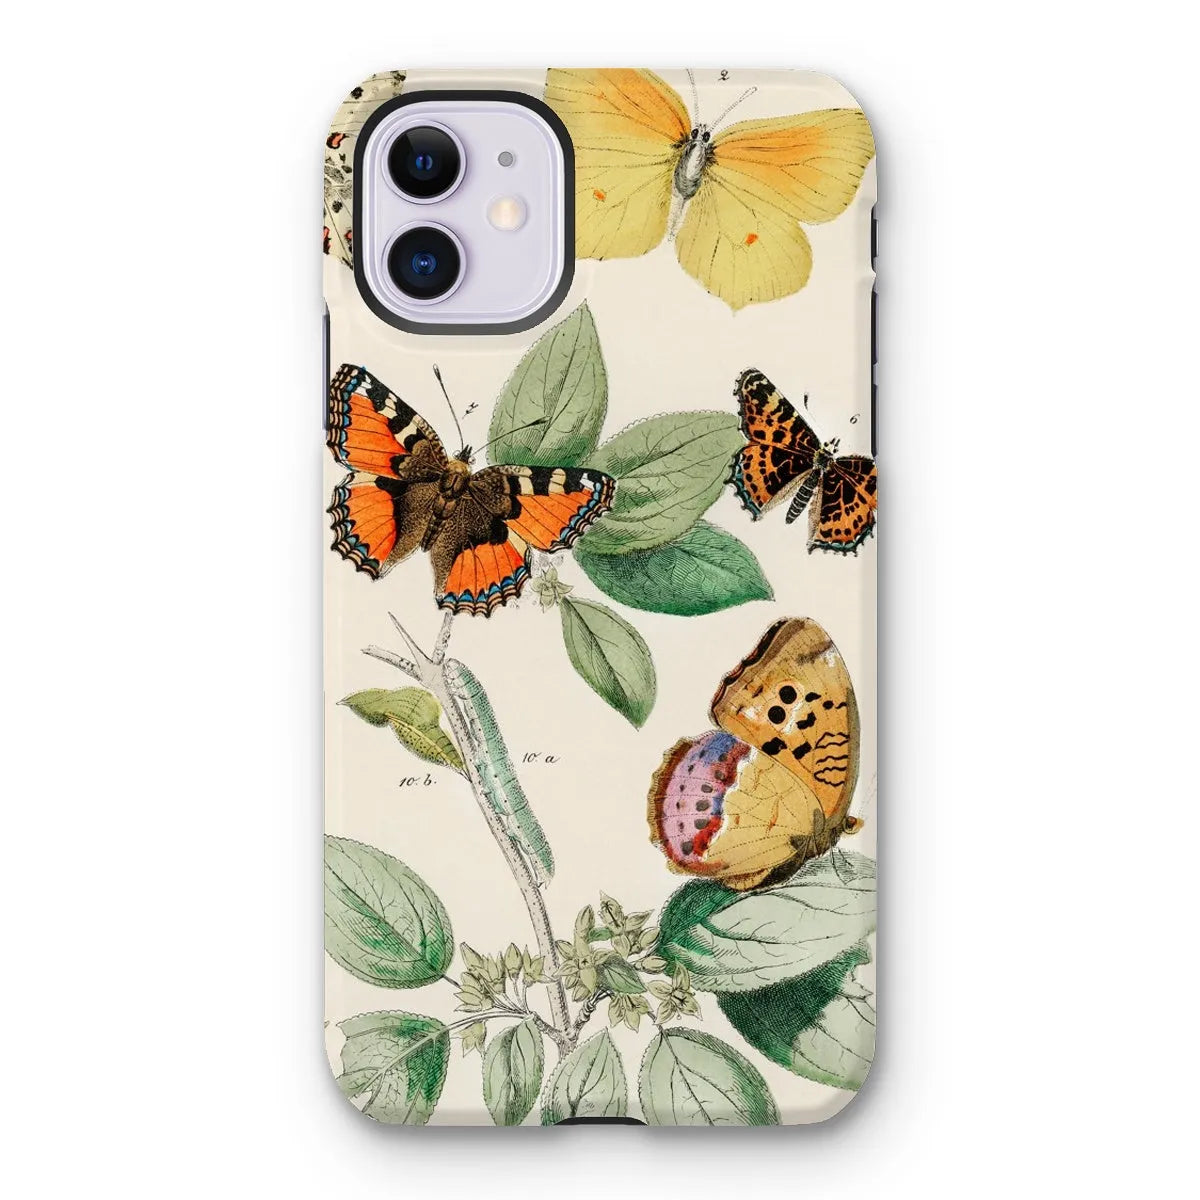 Butterfly Aesthetic Art Phone Case - William Forsell Kirby - Iphone 11 / Matte - Mobile Phone Cases - Aesthetic Art